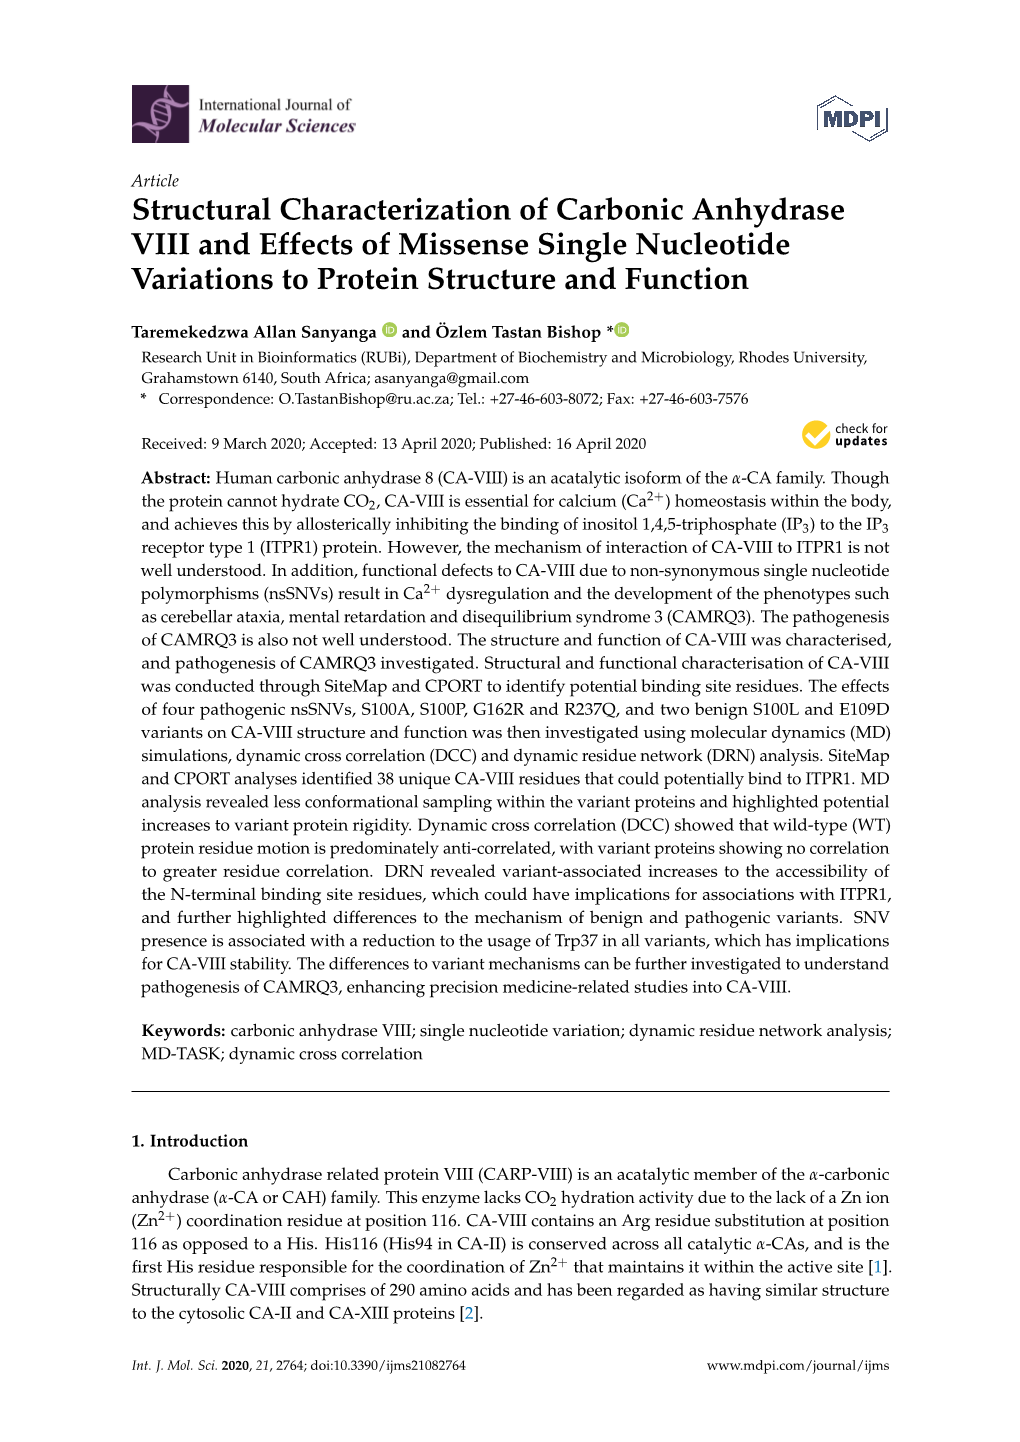 Structural Characterization of Carbonic Anhydrase VIII and Effects of Missense Single Nucleotide Variations to Protein Structure and Function